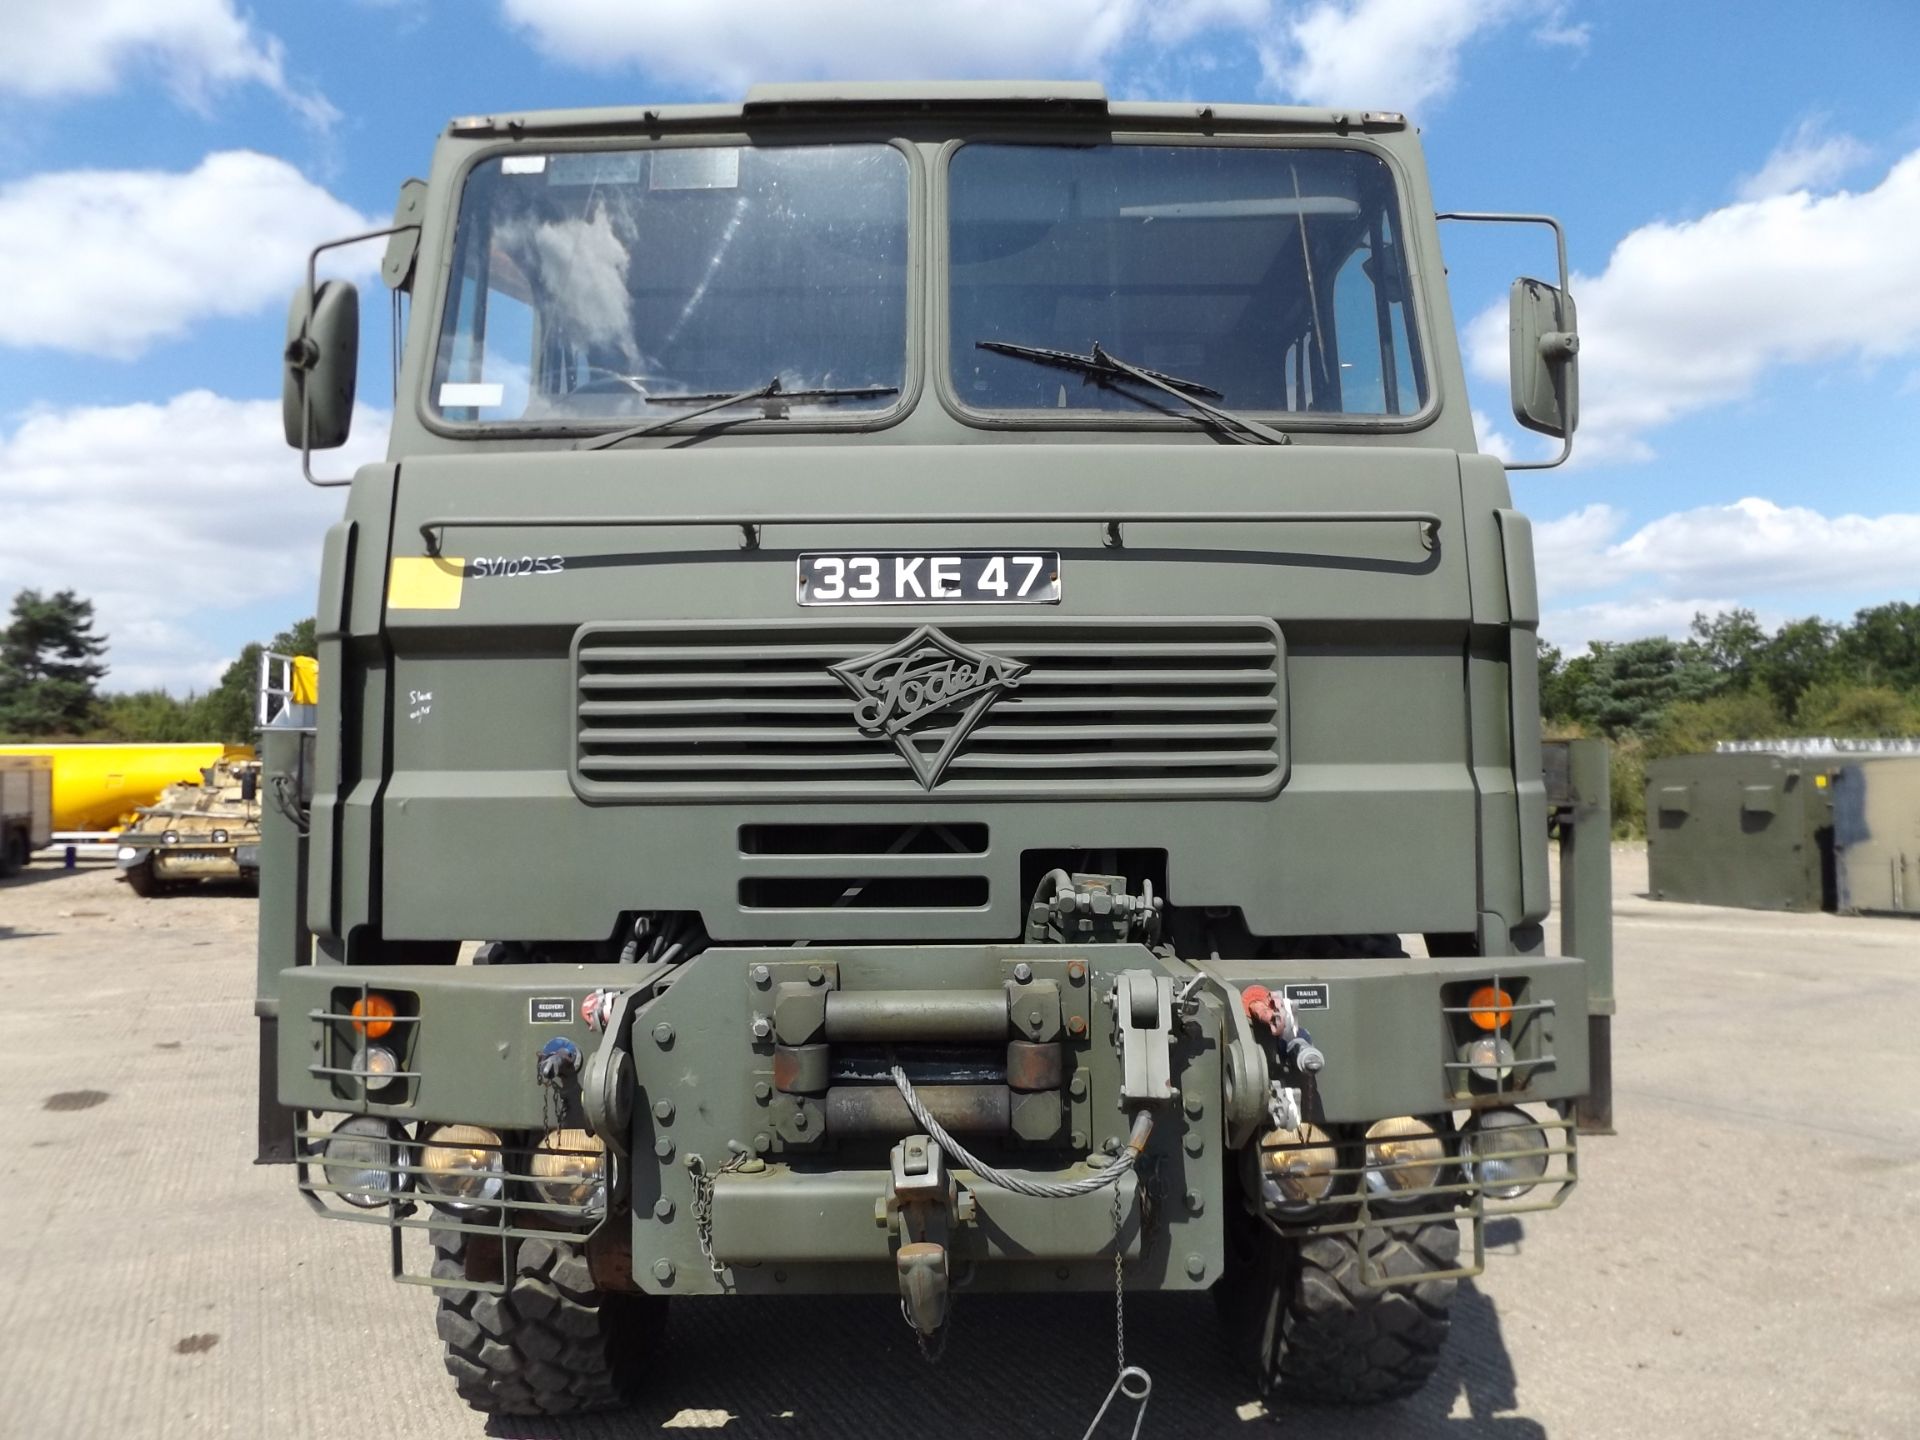 Foden 6x6 Recovery Vehicle which is Complete with Remote and EKA Recovery Tools - Image 2 of 24